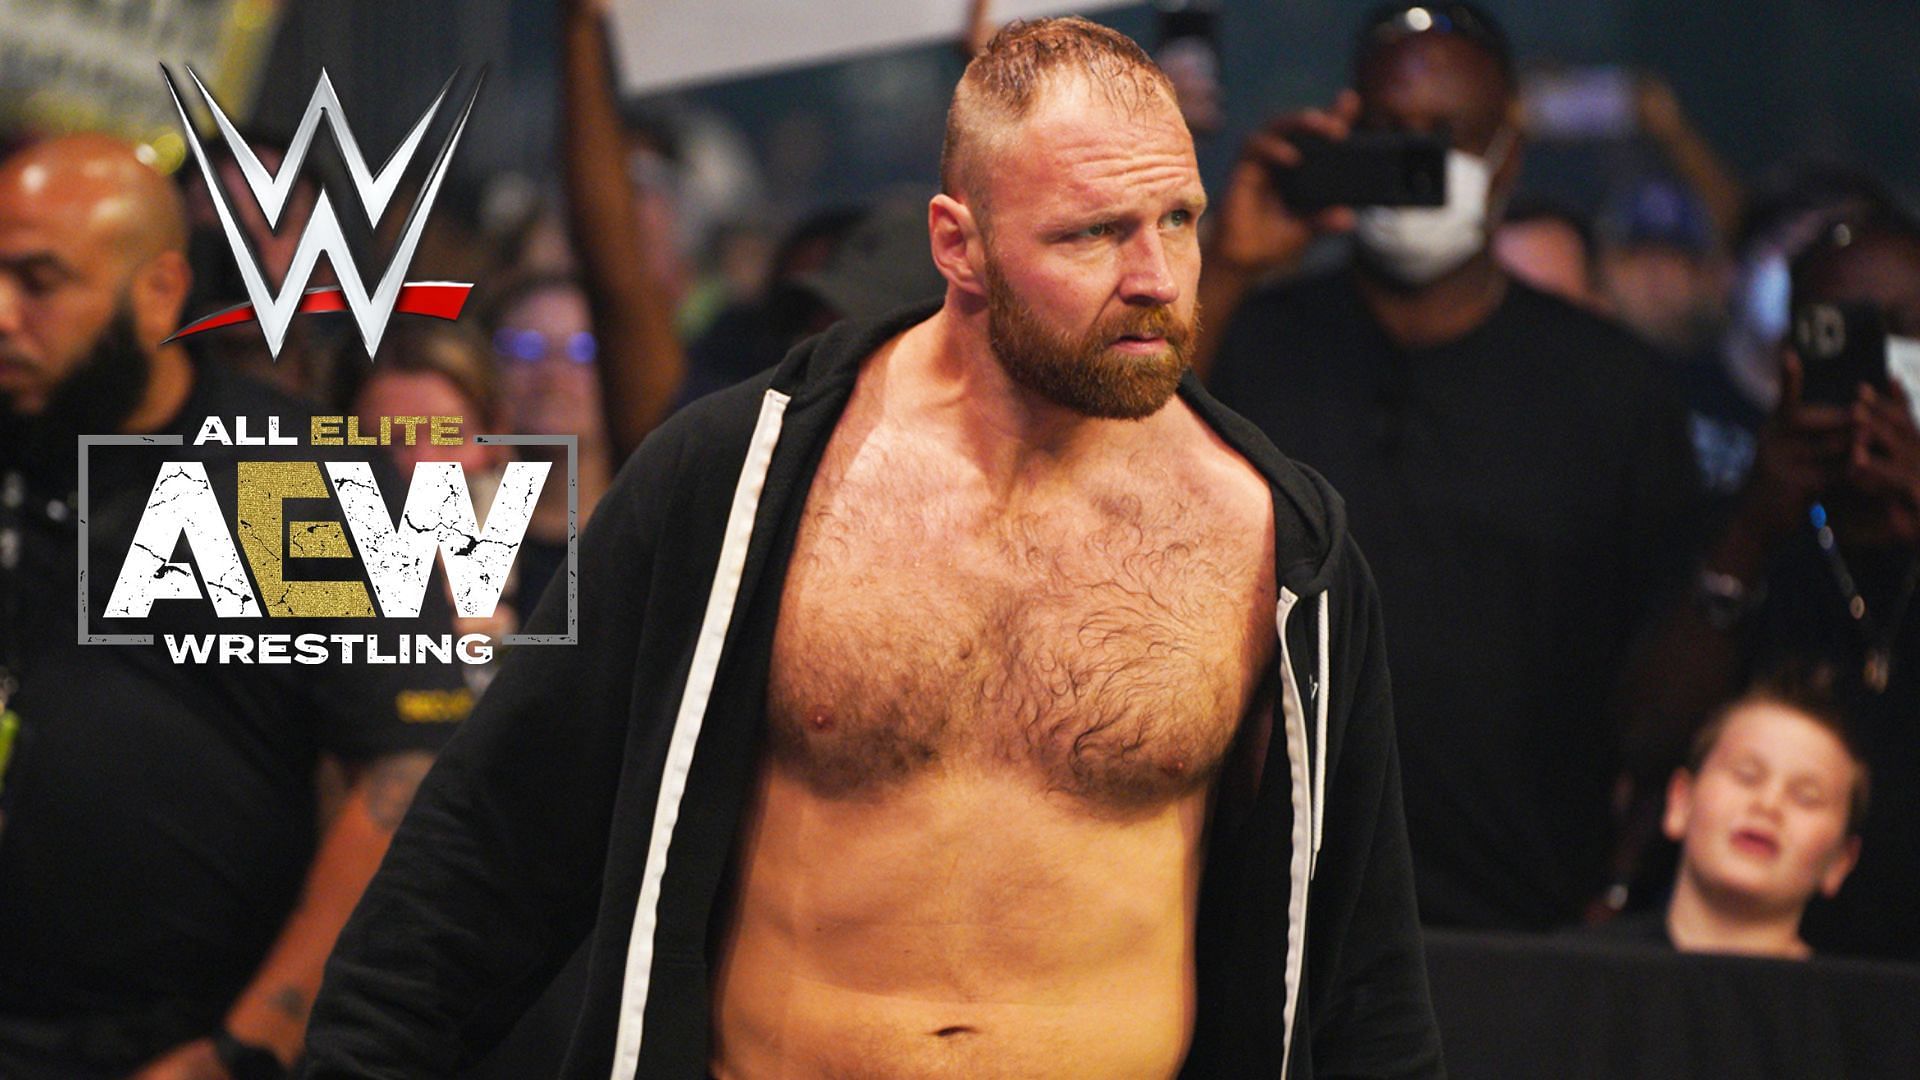 Jon Moxley is scheduled to have a non-AEW match soon!